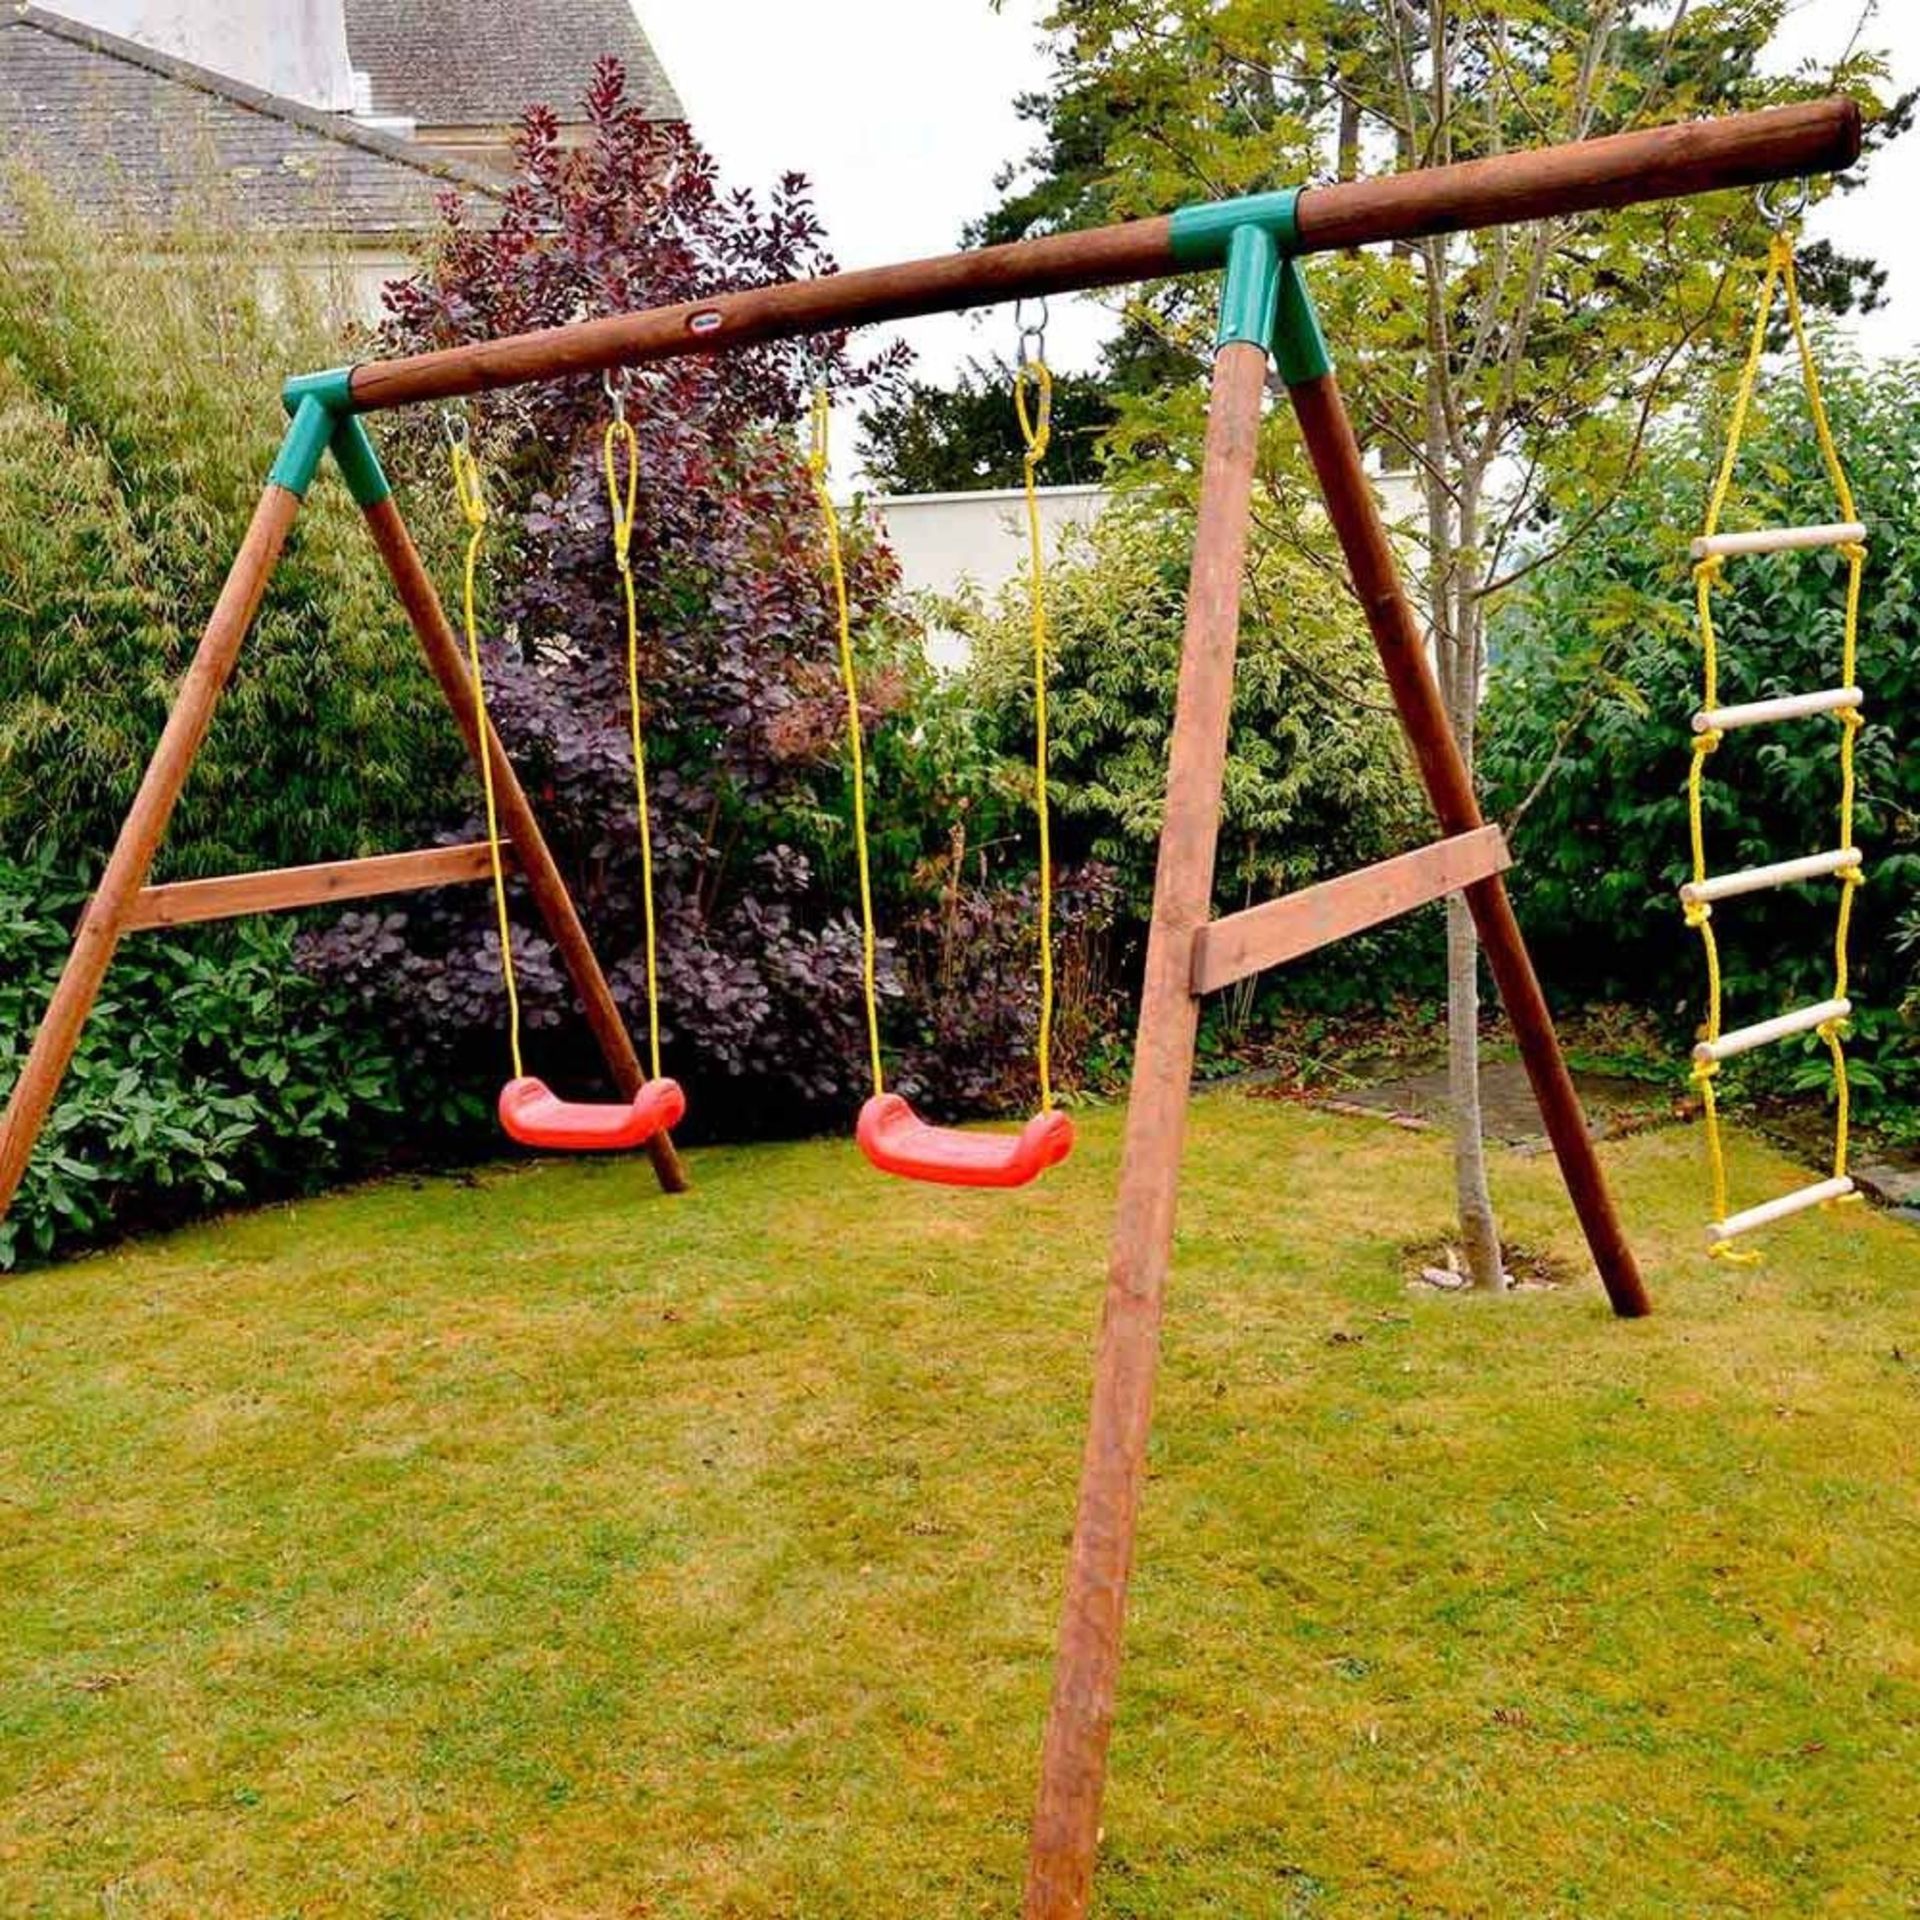 New Little Tikes Riga Swing with Ladder. RRP £349. This wooden play system will provide hours of - Image 2 of 2